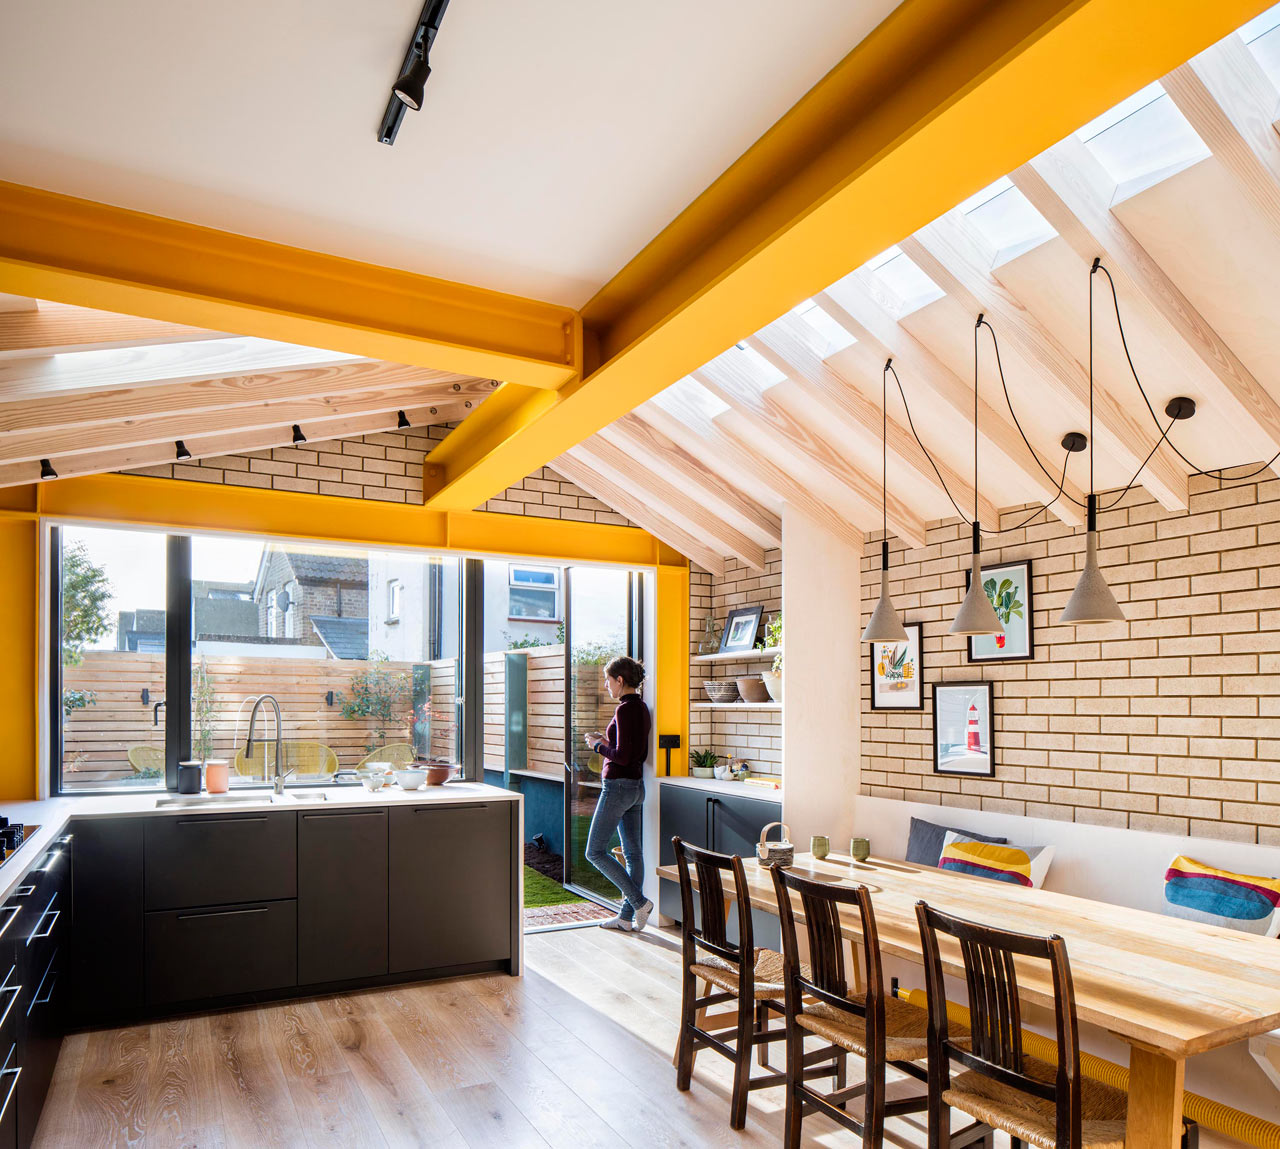 London's Yellow Steel House Is a Colorful Extension to a Terraced House